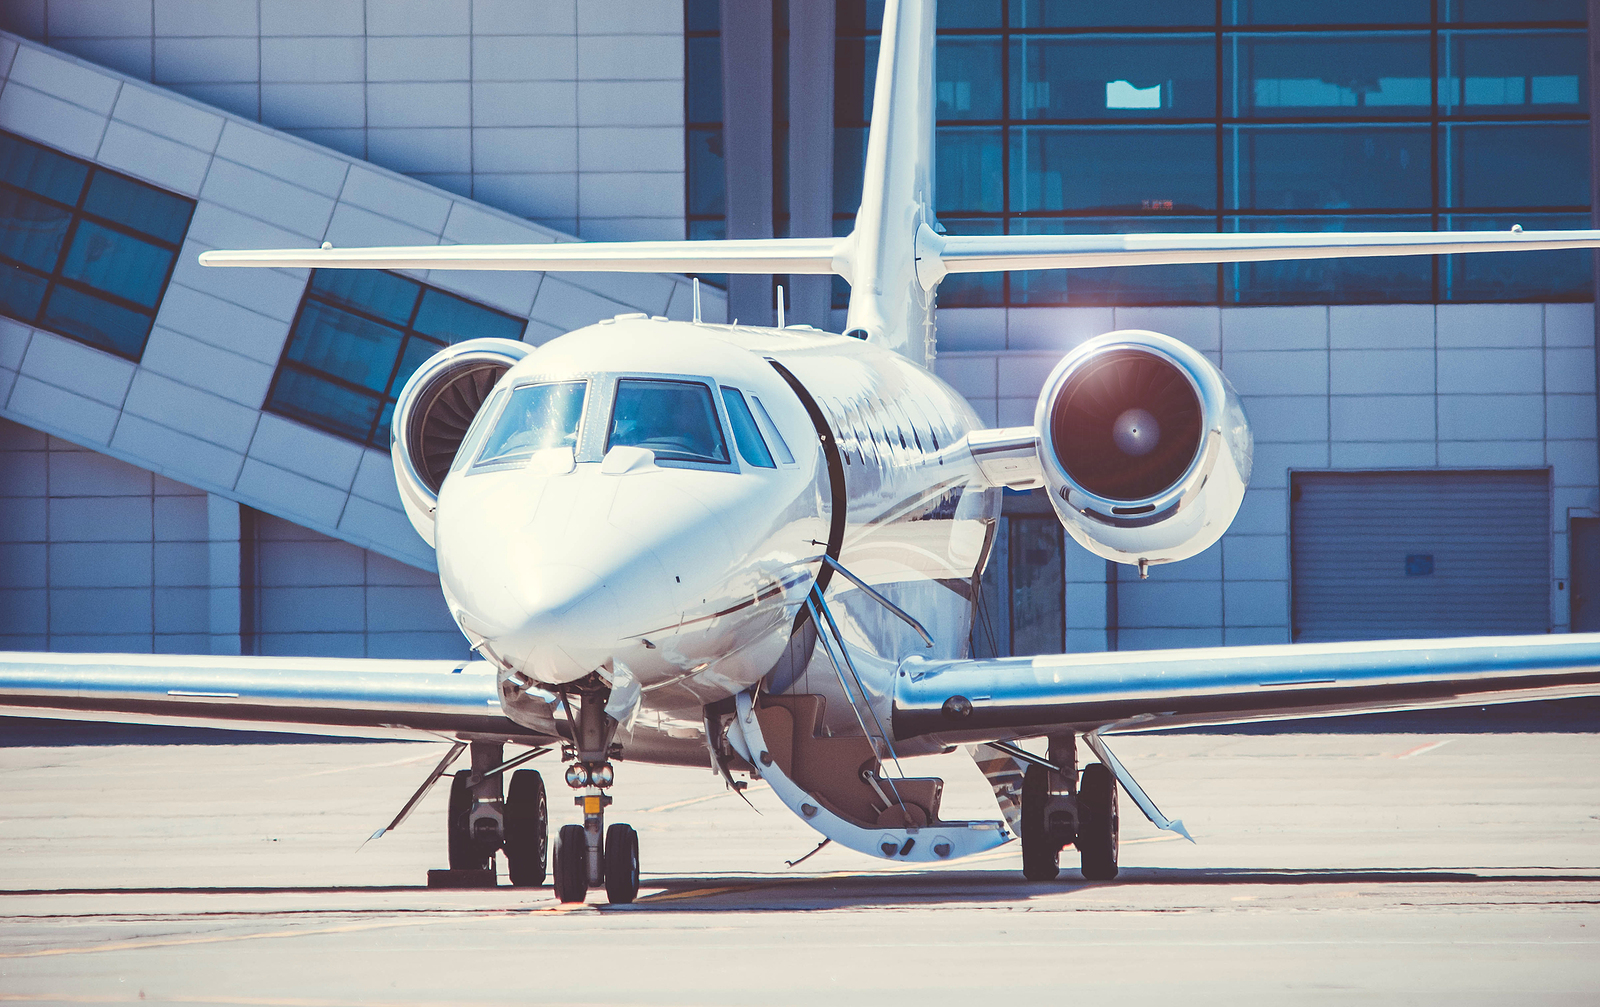 JetMembership.com is becoming an increasingly popular option for travelers looking to fly private at a more reasonable price.